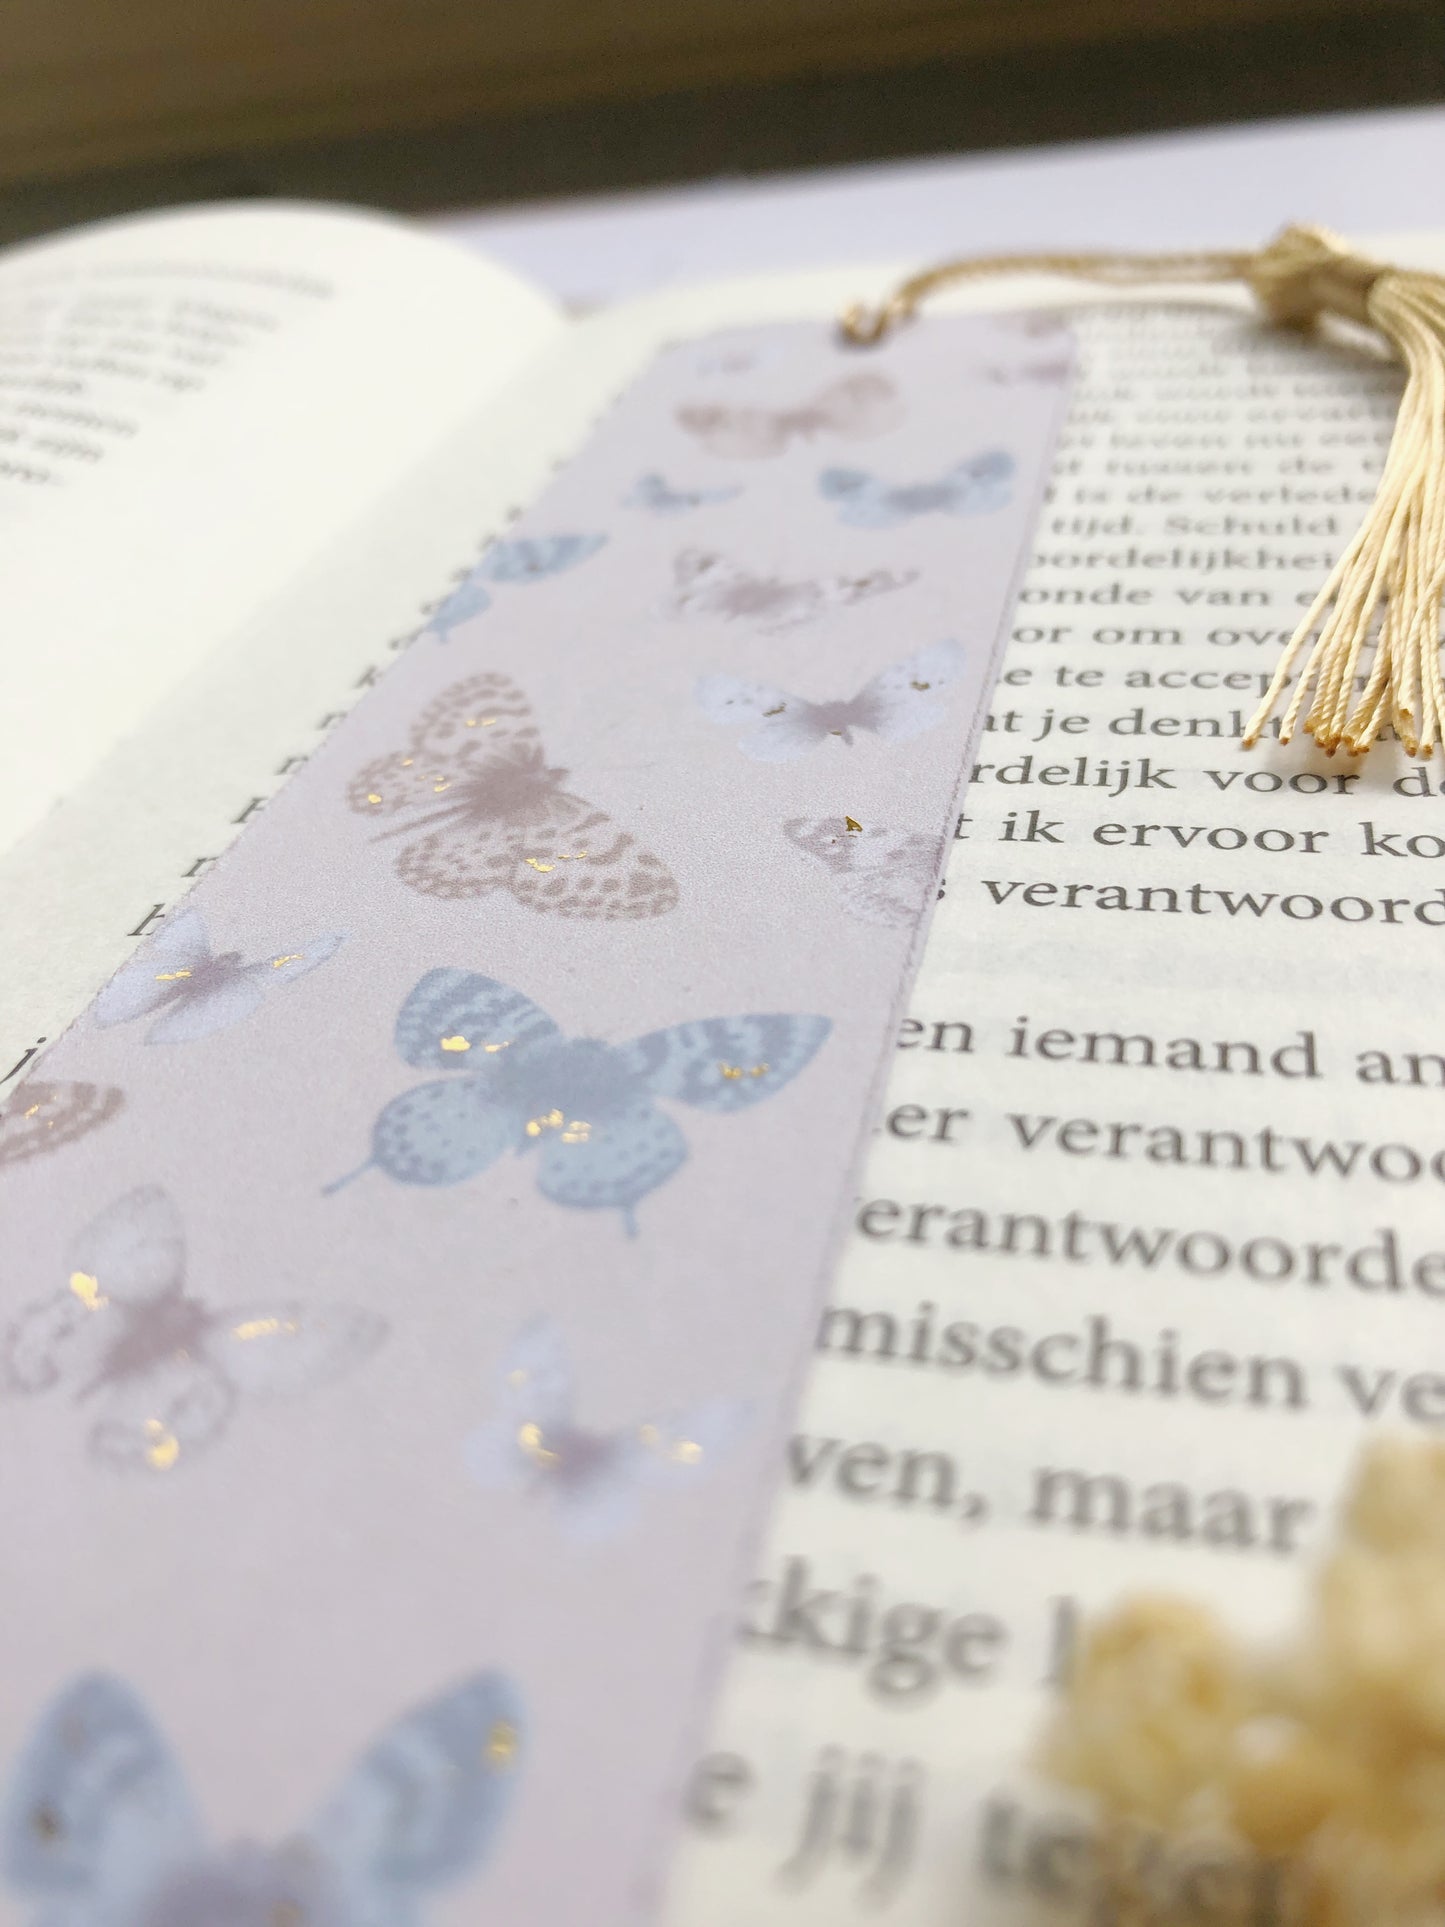 "Gold Foiled Bookmark With Butterflies"